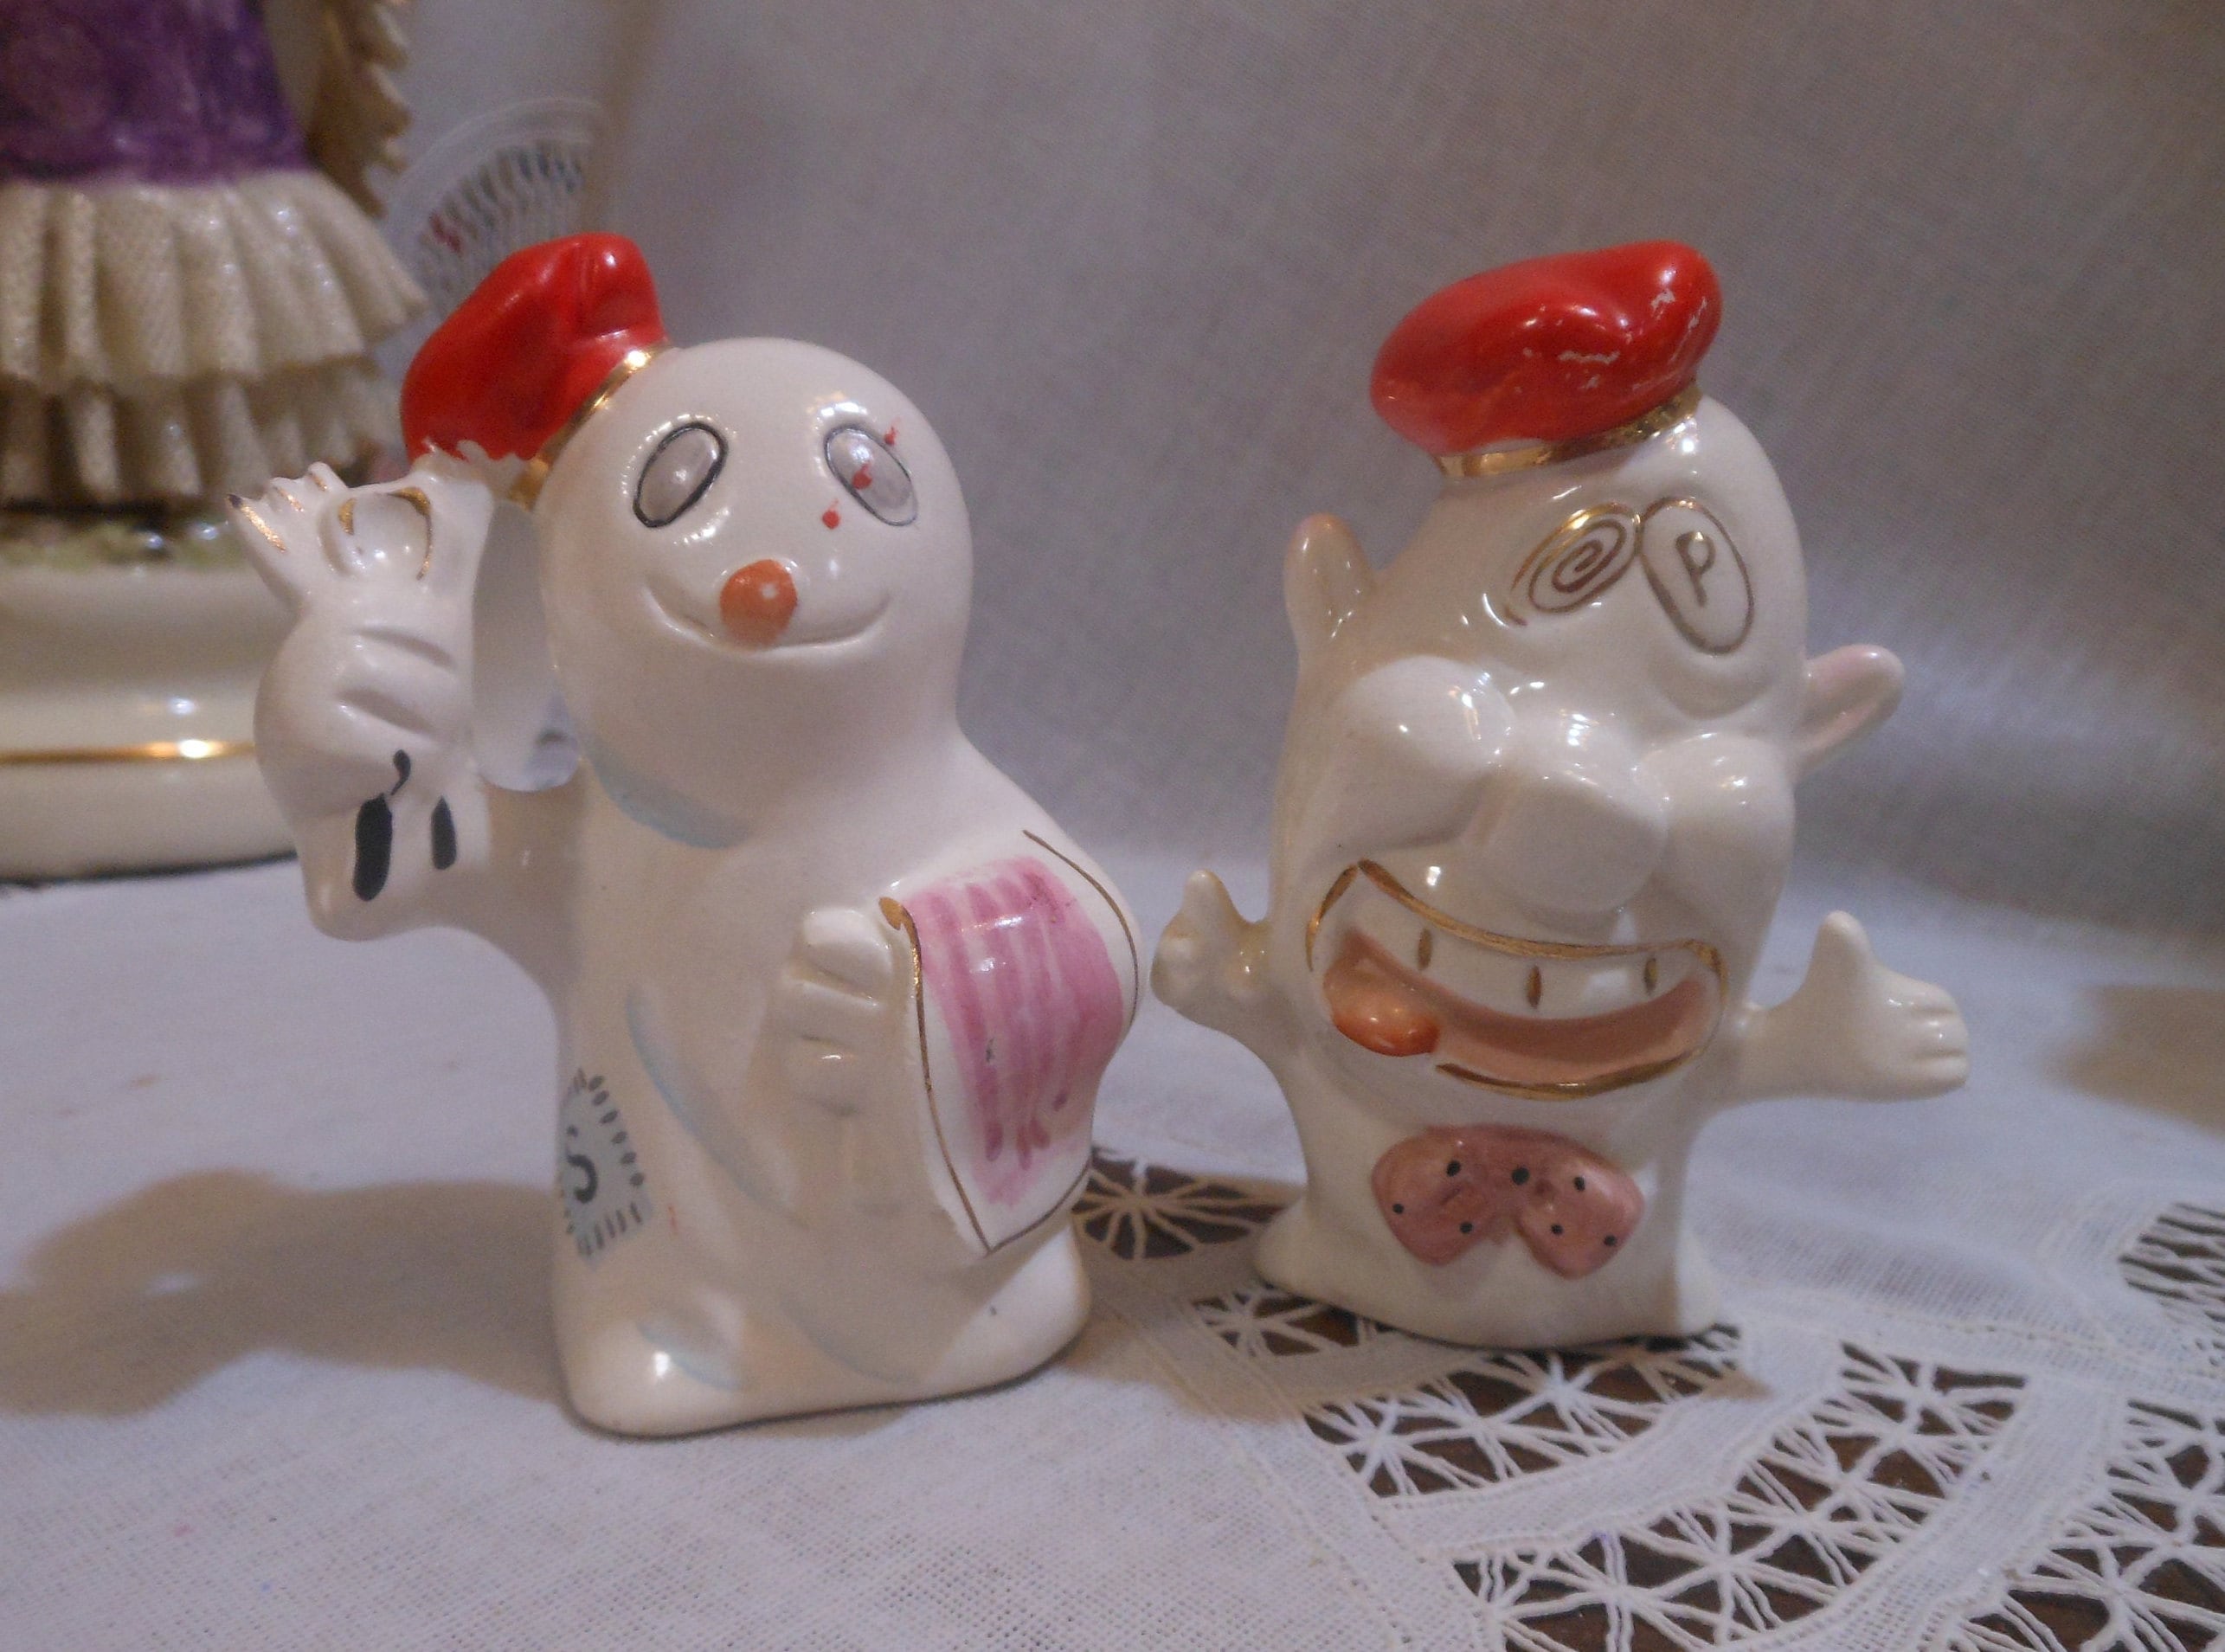 Tabletop Ghost Salt And Pepper Shakers Halloween Boo Spooky Shaker R0016  Blk/Or, 1 - Fry's Food Stores